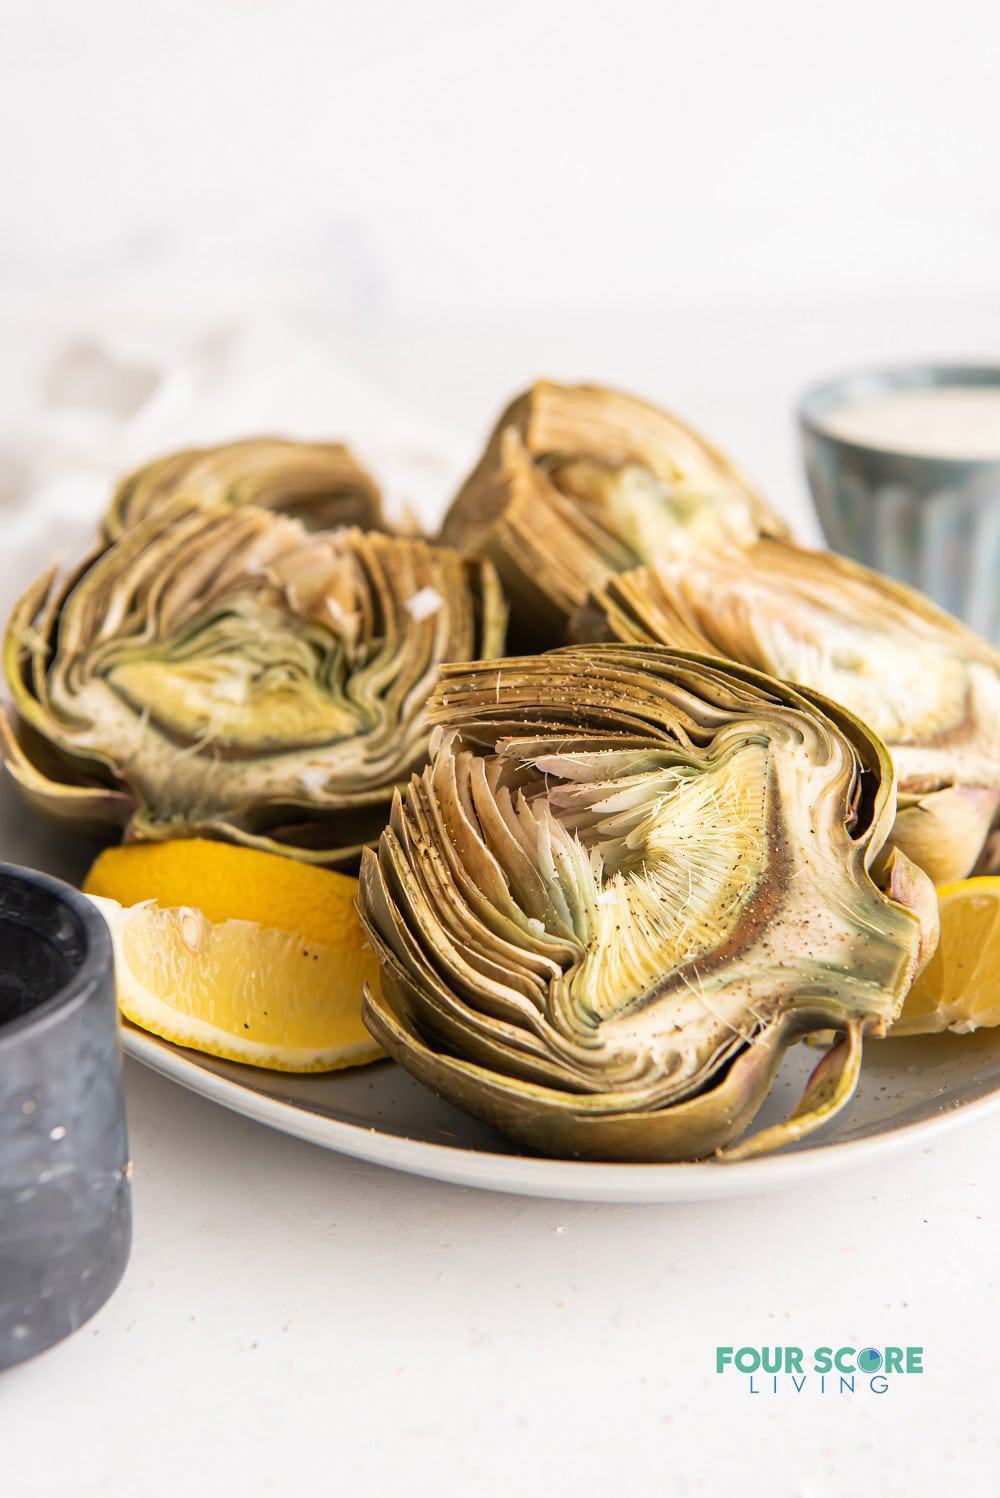 a plate of halved artichokes garnished with lemon wedges.